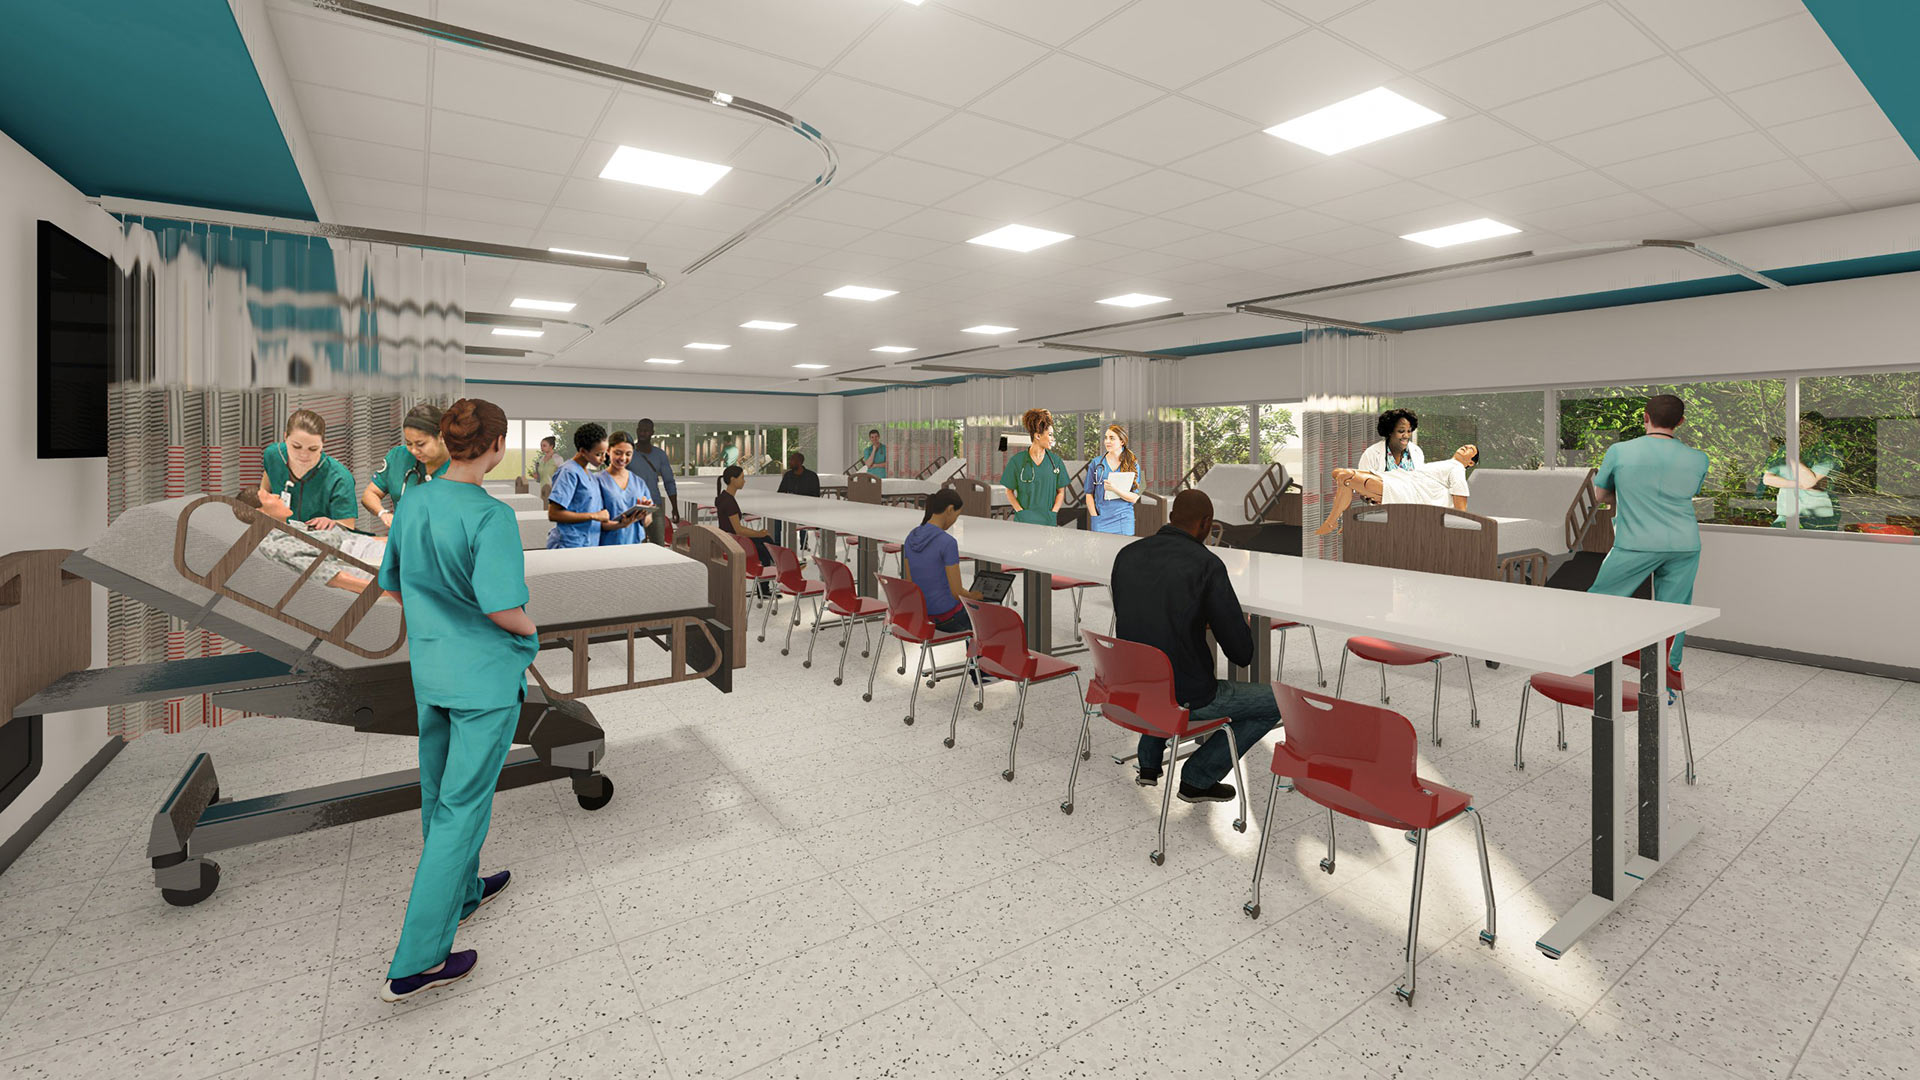 Rendering of planned health care skills lab